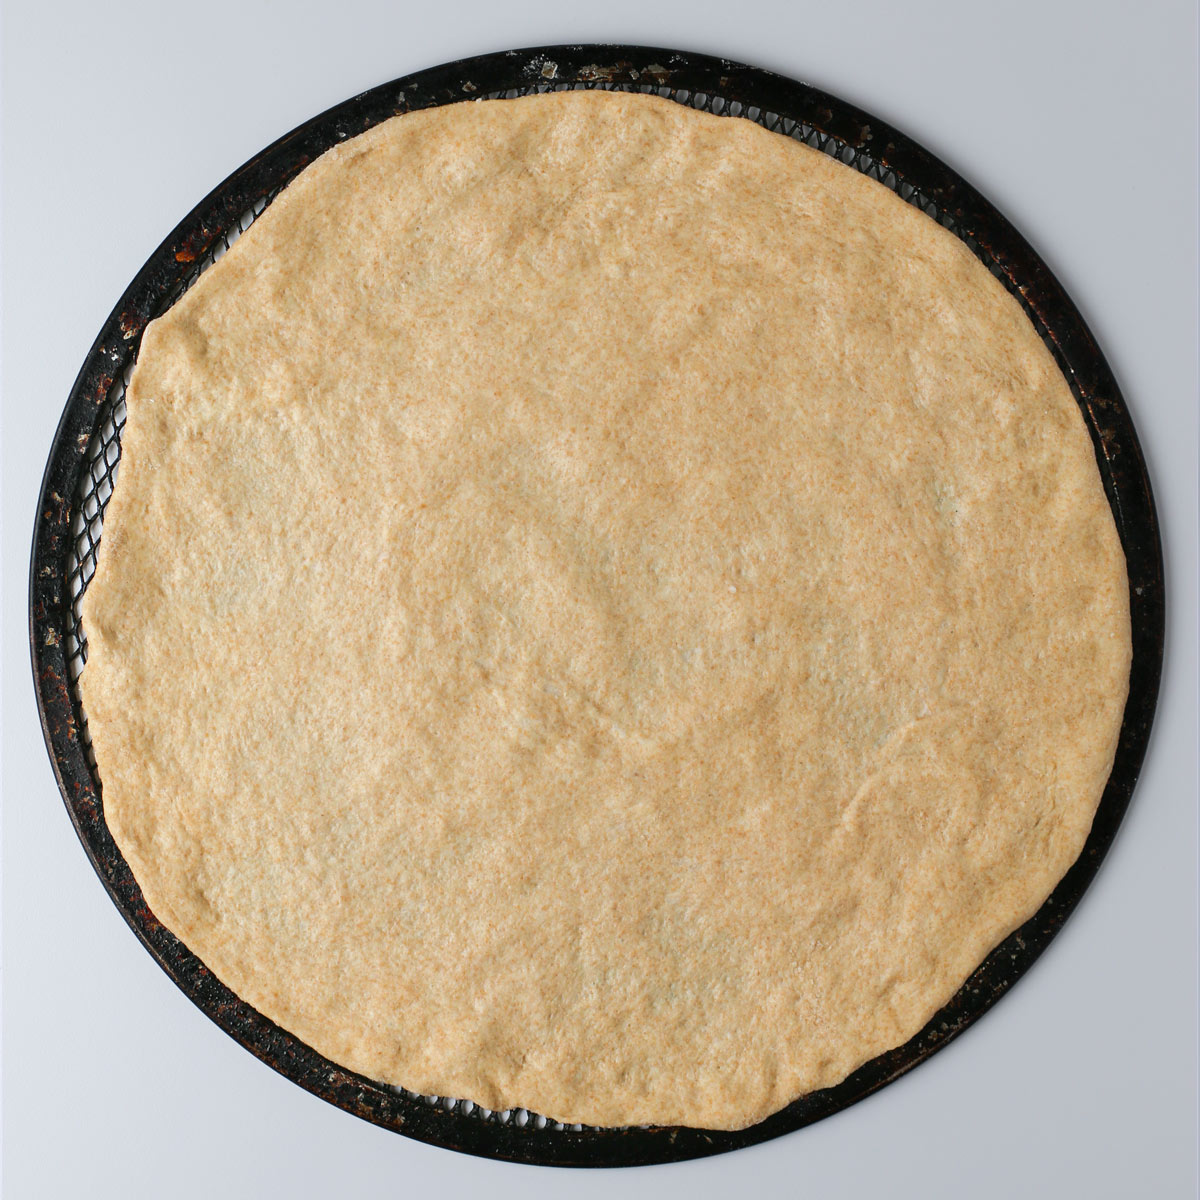 plain round of whole wheat pizza dough on a screen.